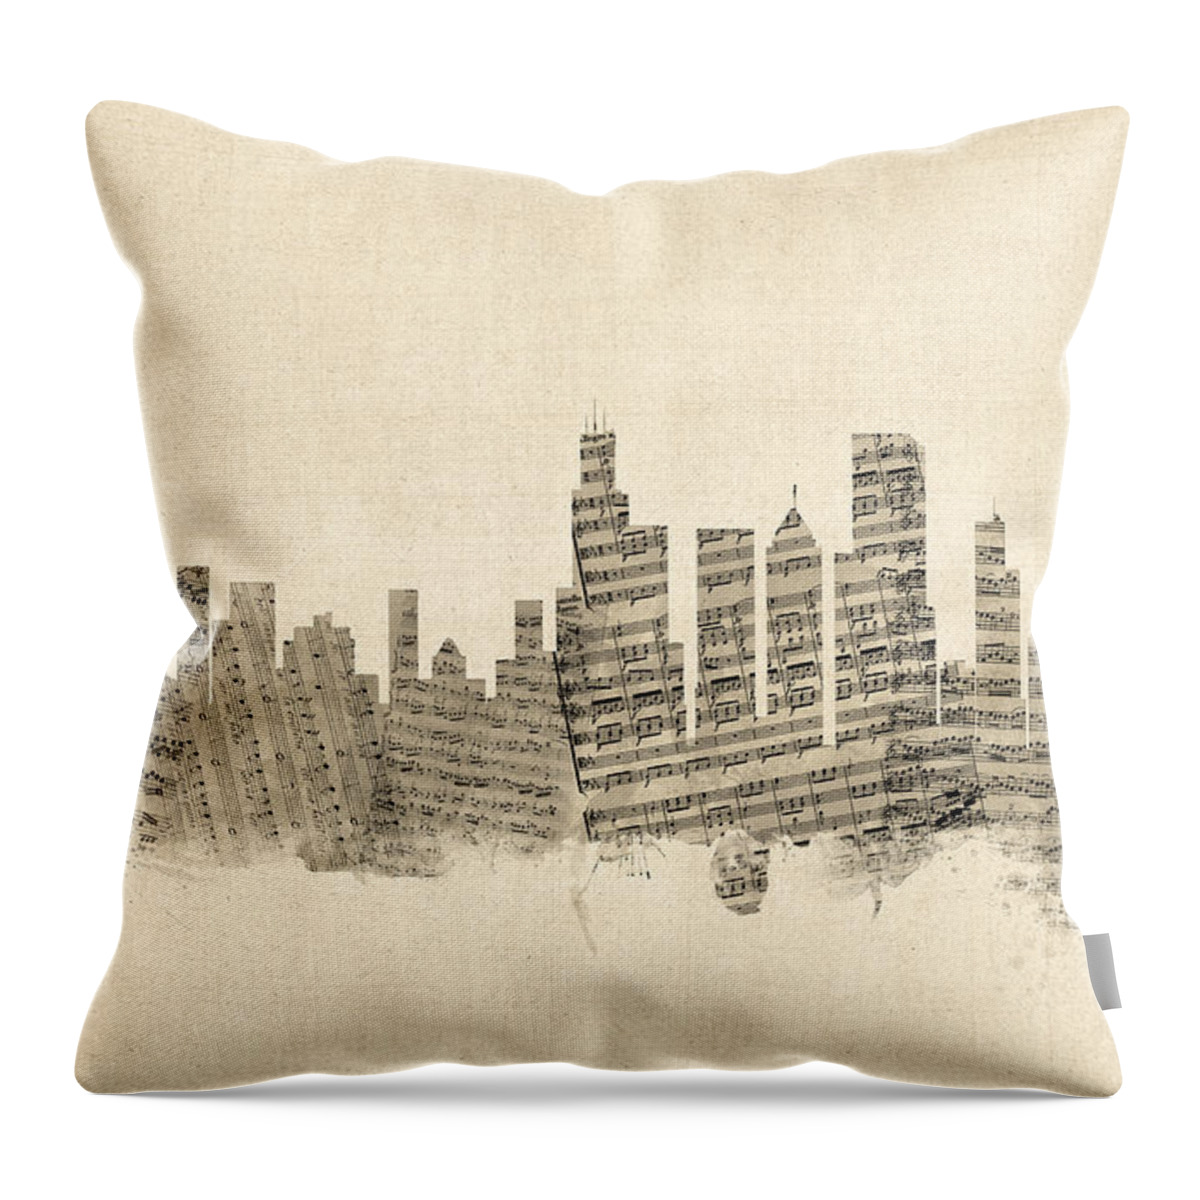 Chicago Throw Pillow featuring the digital art Chicago Illinois Skyline Sheet Music Cityscape by Michael Tompsett